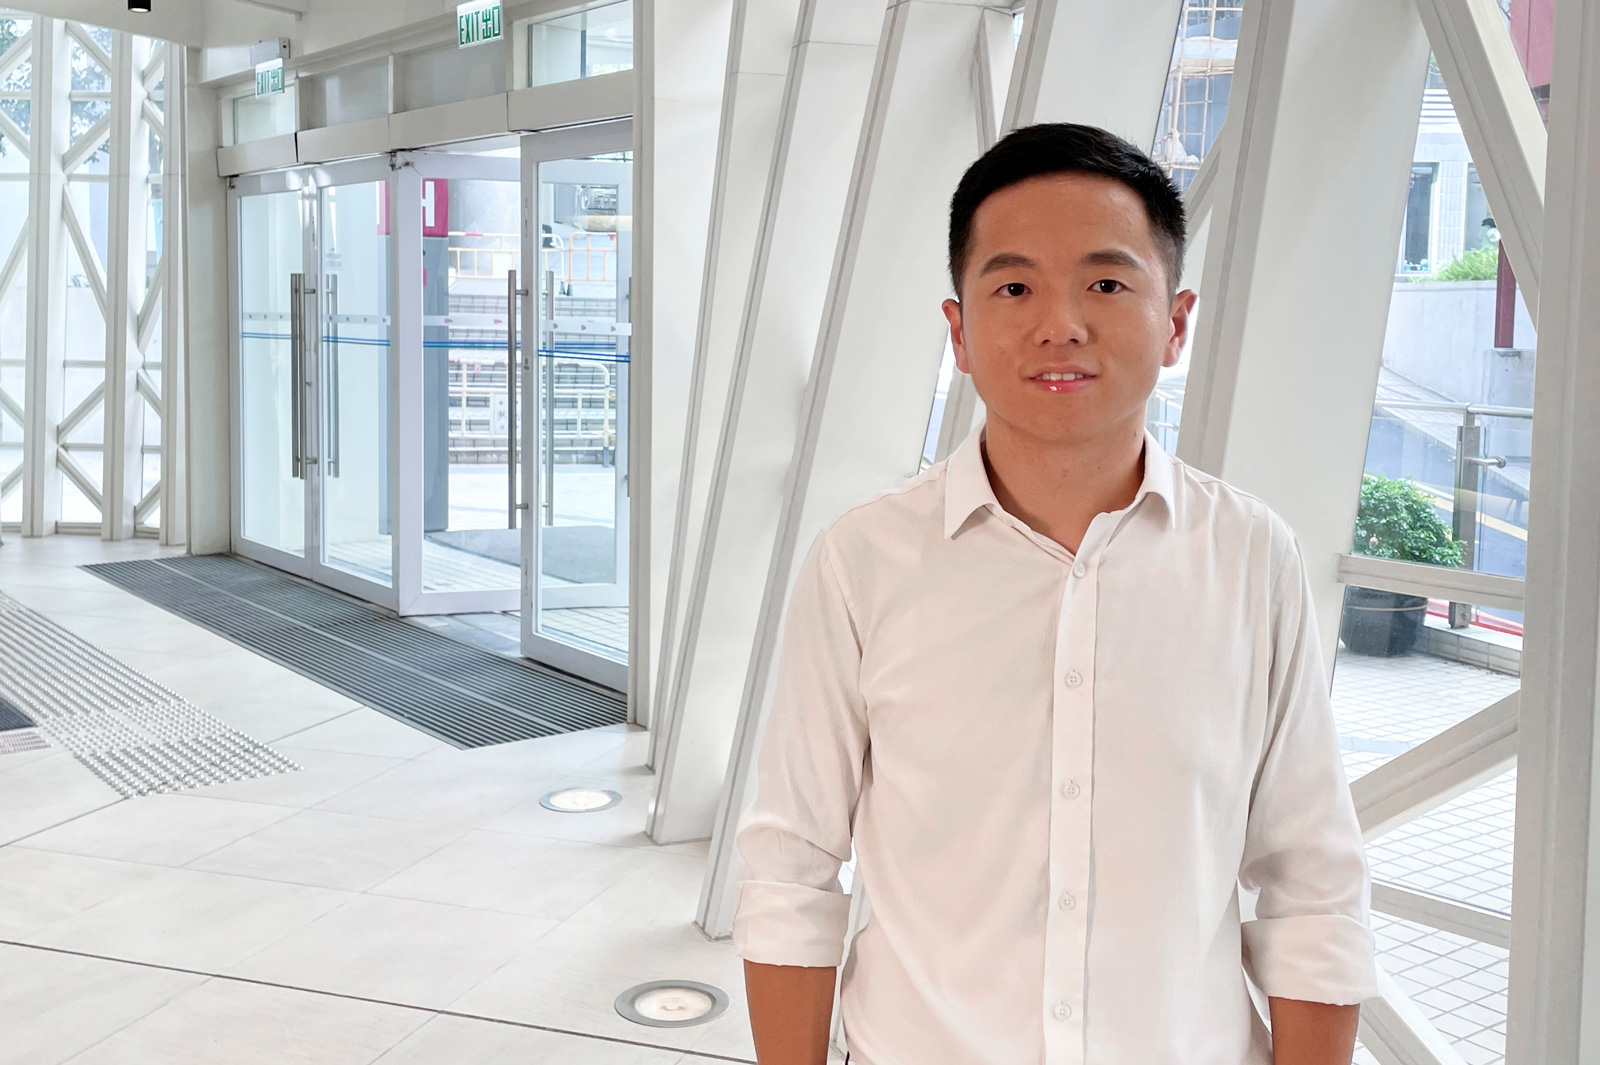 Mr Fang Peiran graduated from CityU’s Joint Bachelor’s Degree Programme with Columbia University in 2017.